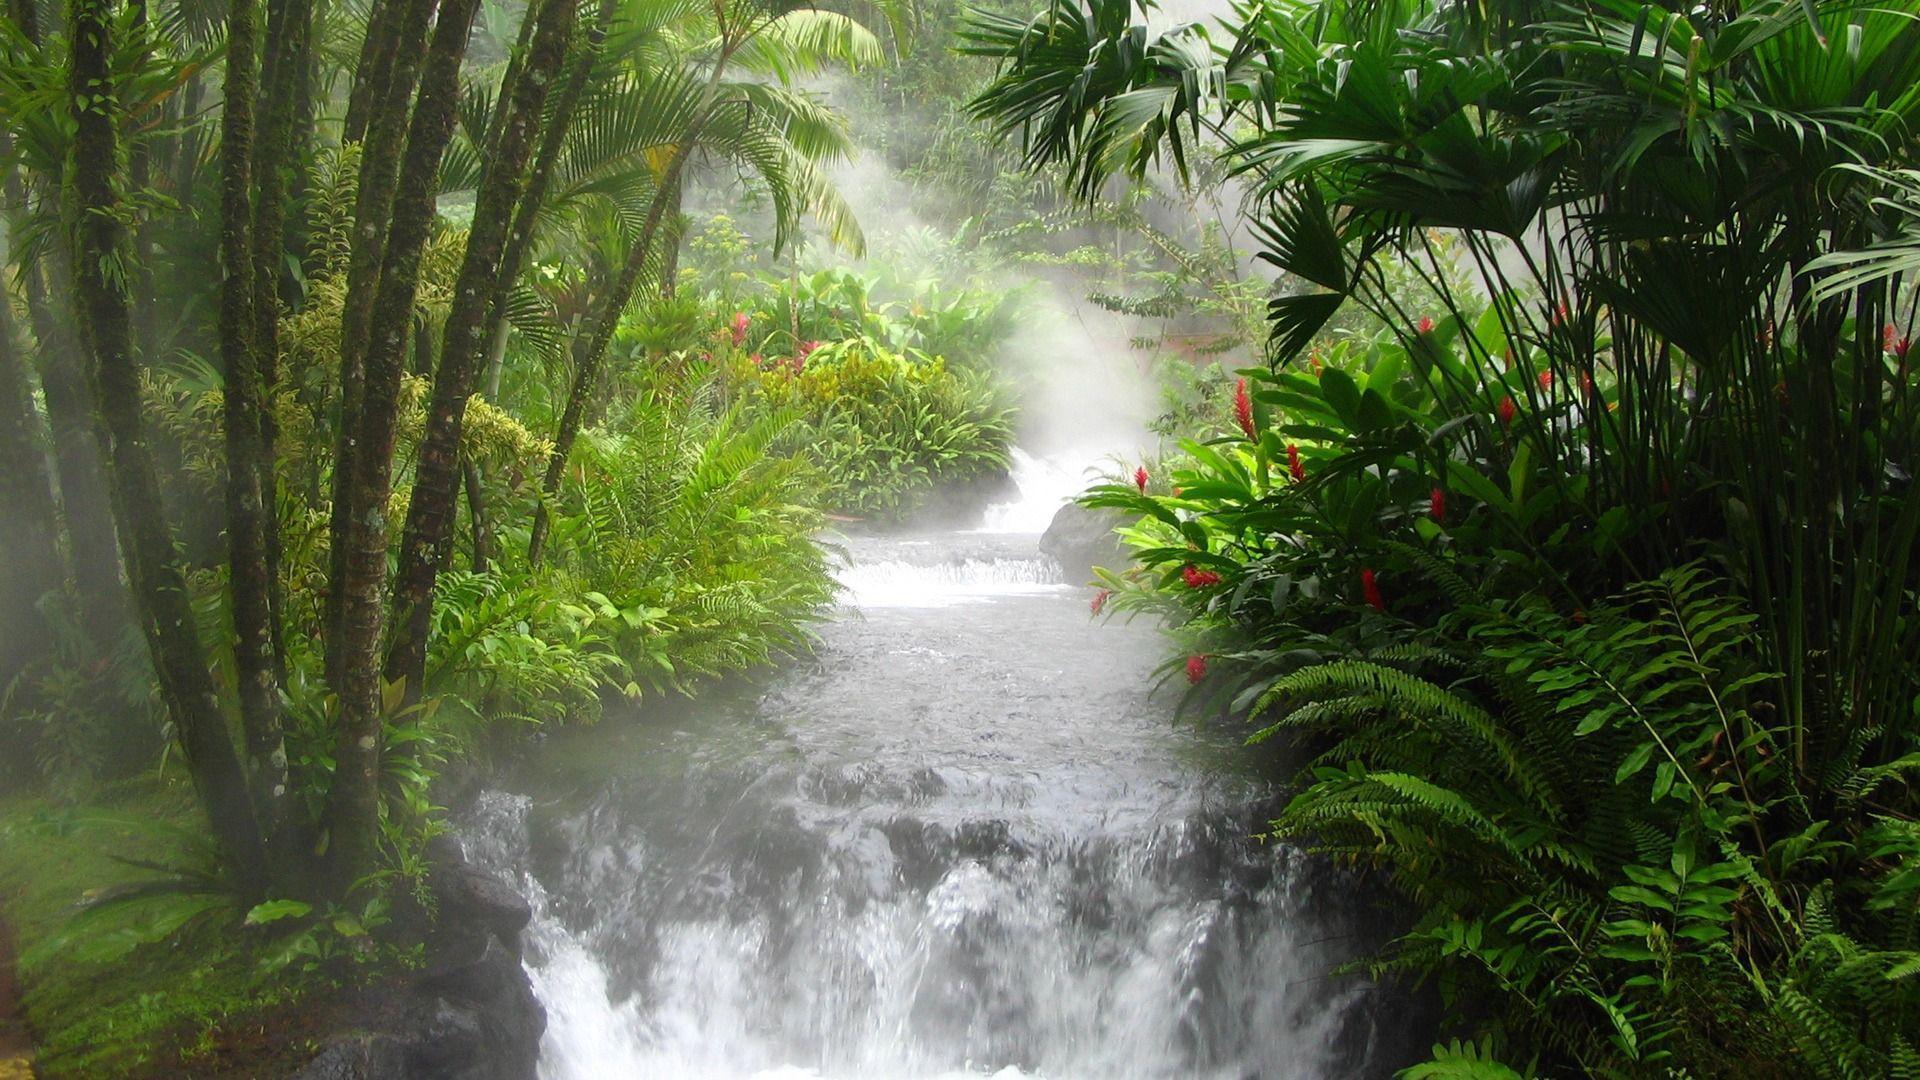 Hot water river in Costa rica wallpaper and image